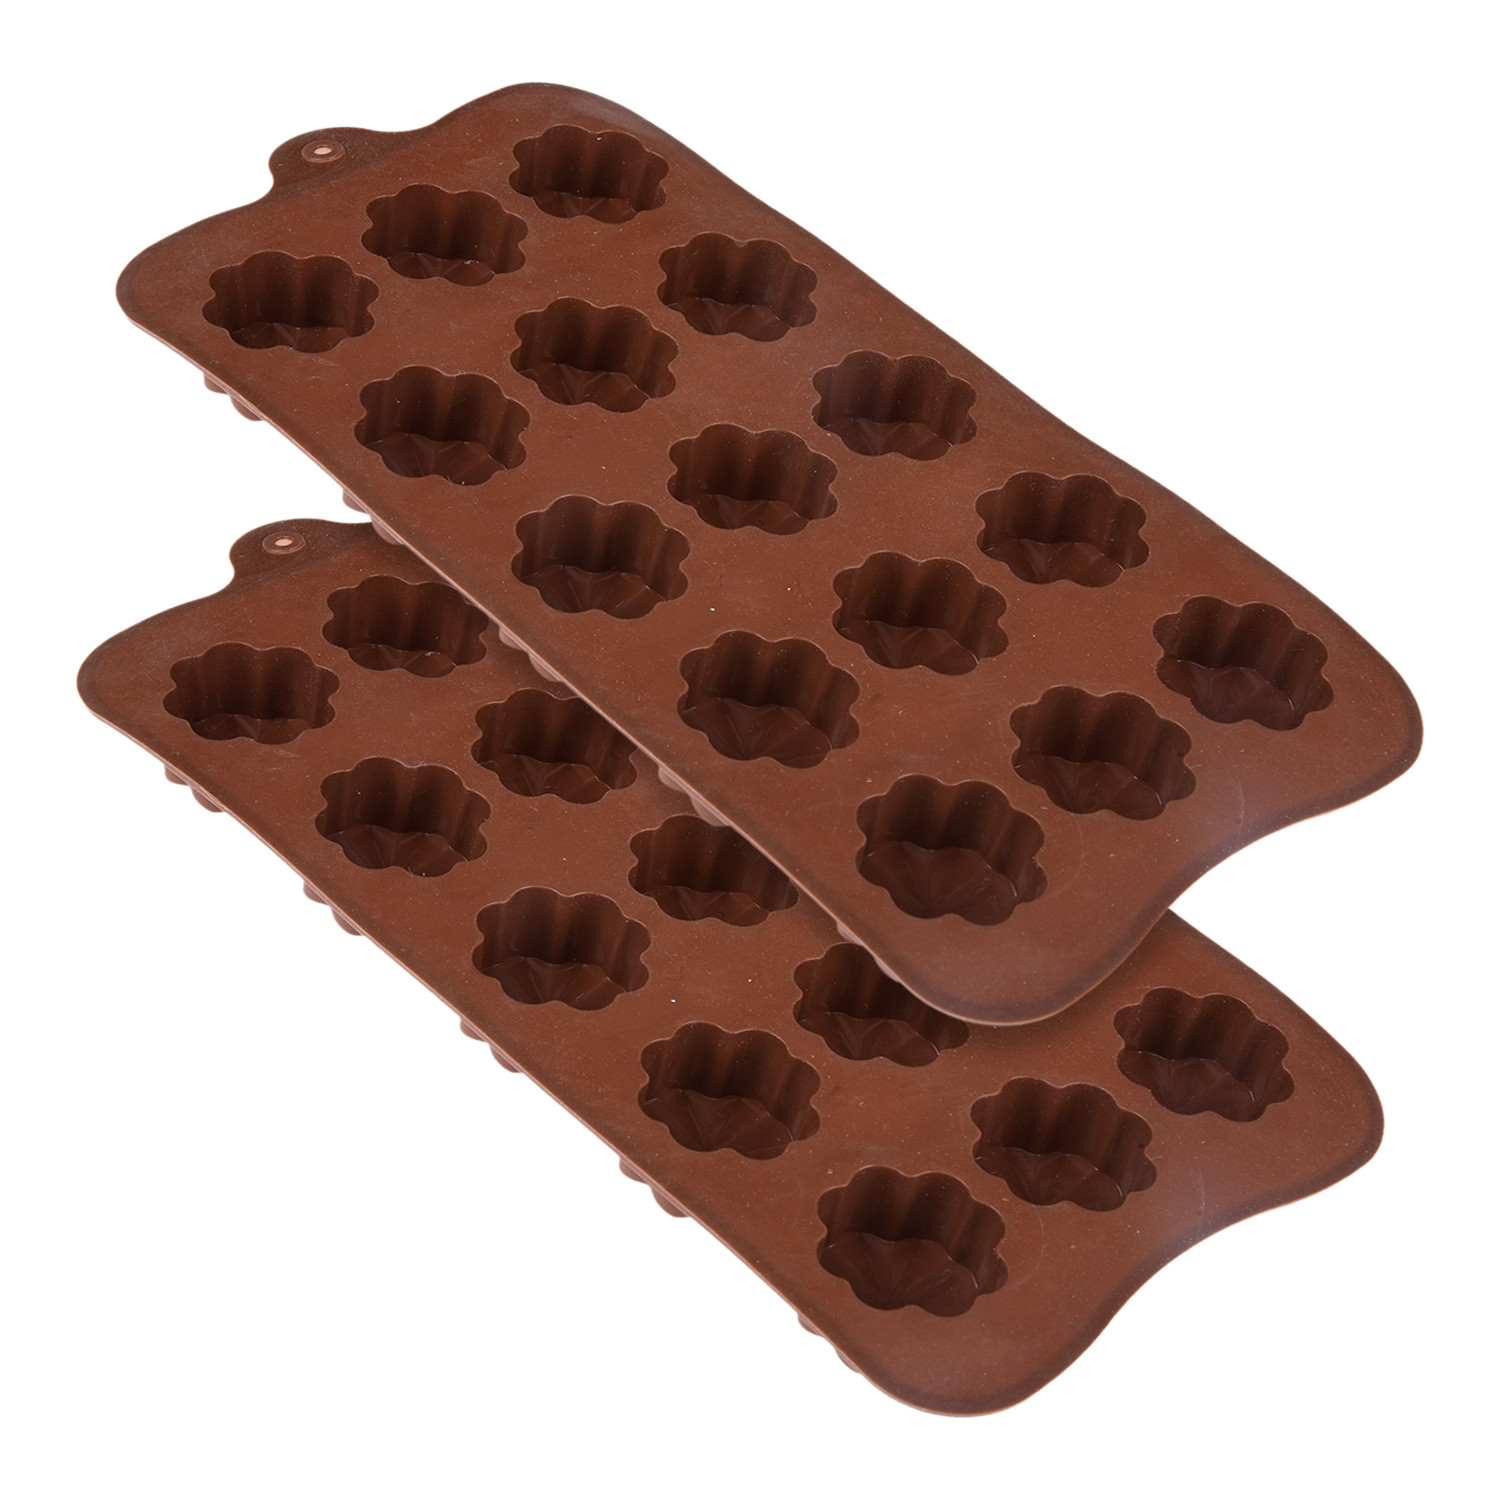 Kuber Industries Chocolate Mould | Silicone Cookies Mould Cake | Chocolate Cookies Tray | Flower Chocolate Mould Tray | Non-Stick Cookies Moulds | Candy Mold Tray | Brown